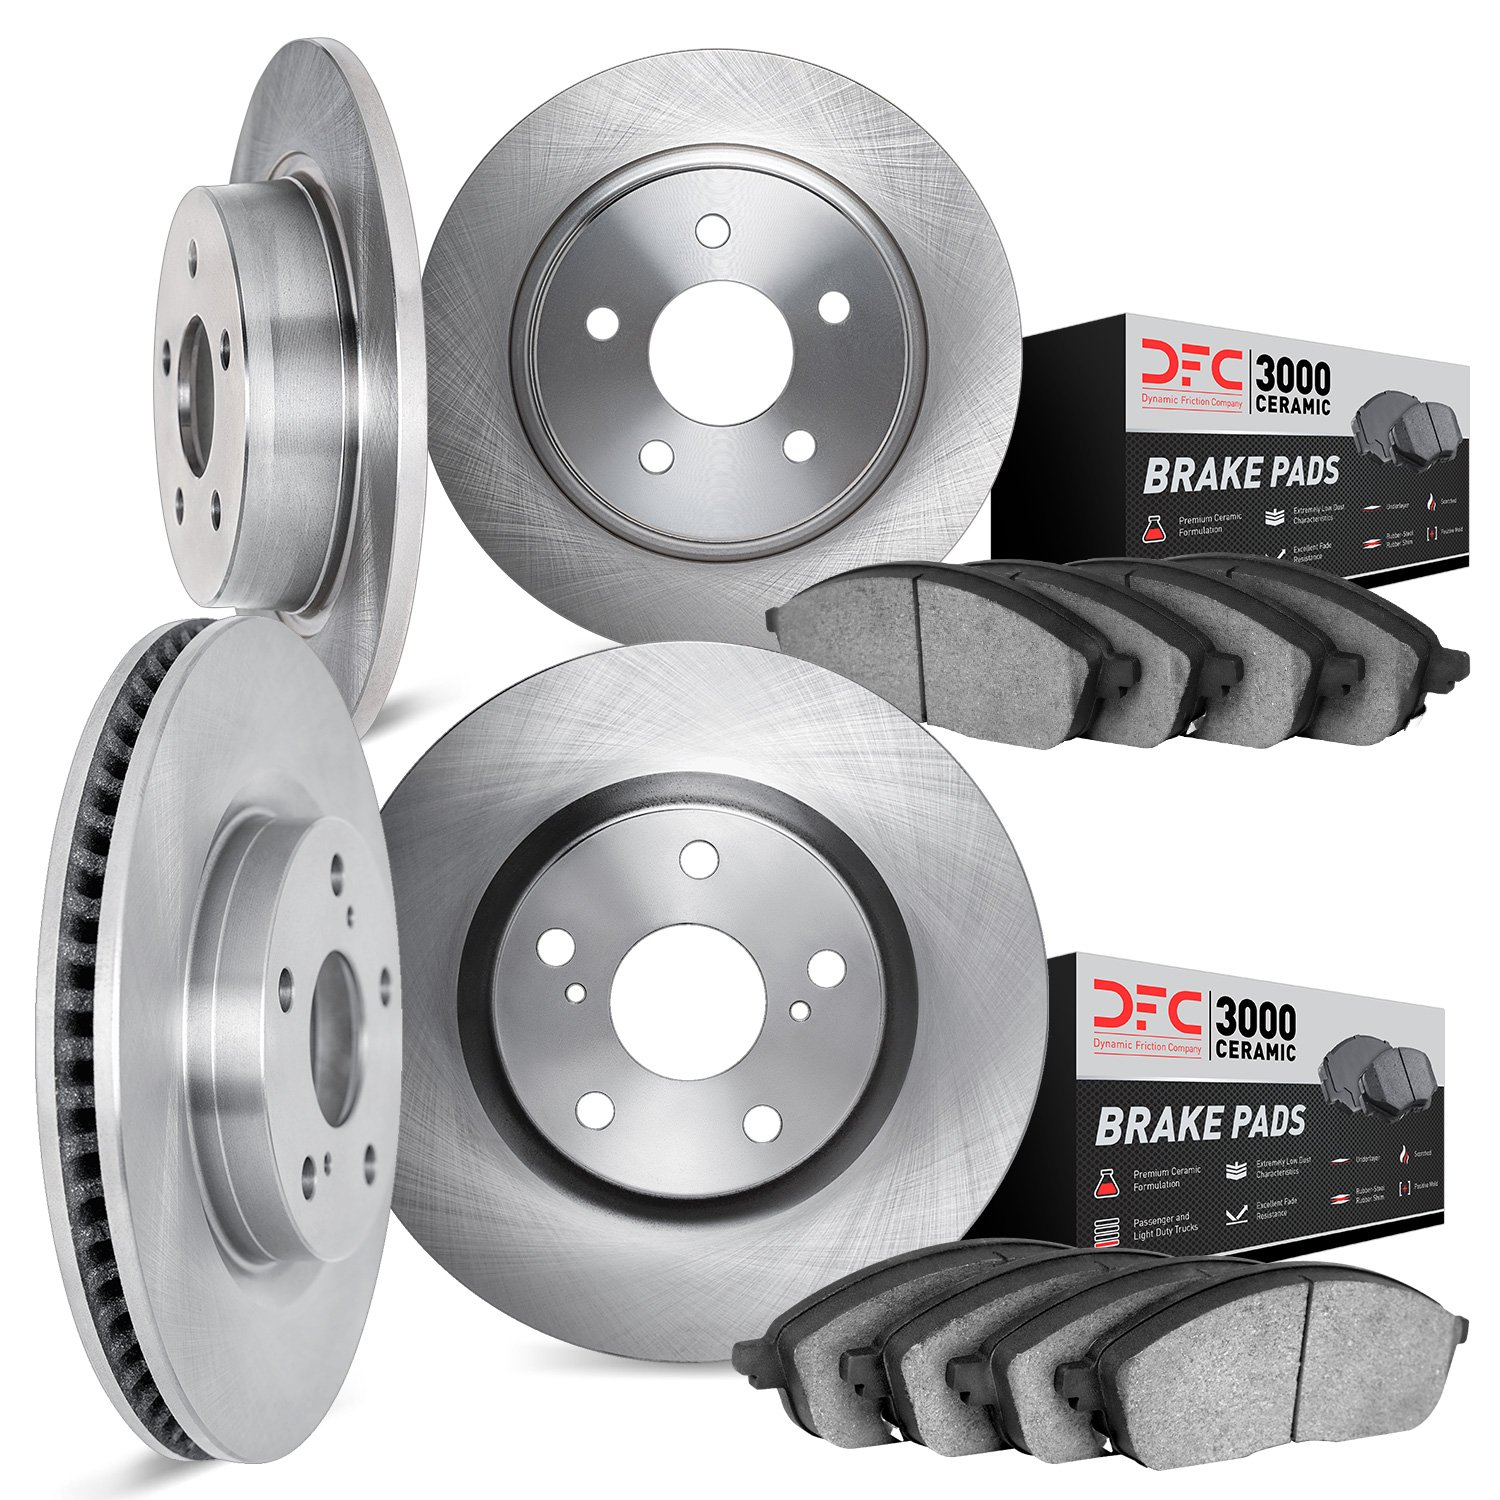 6304-76088 Brake Rotors with 3000-Series Ceramic Brake Pads Kit, 2009-2013 Multiple Makes/Models, Position: Front and Rear